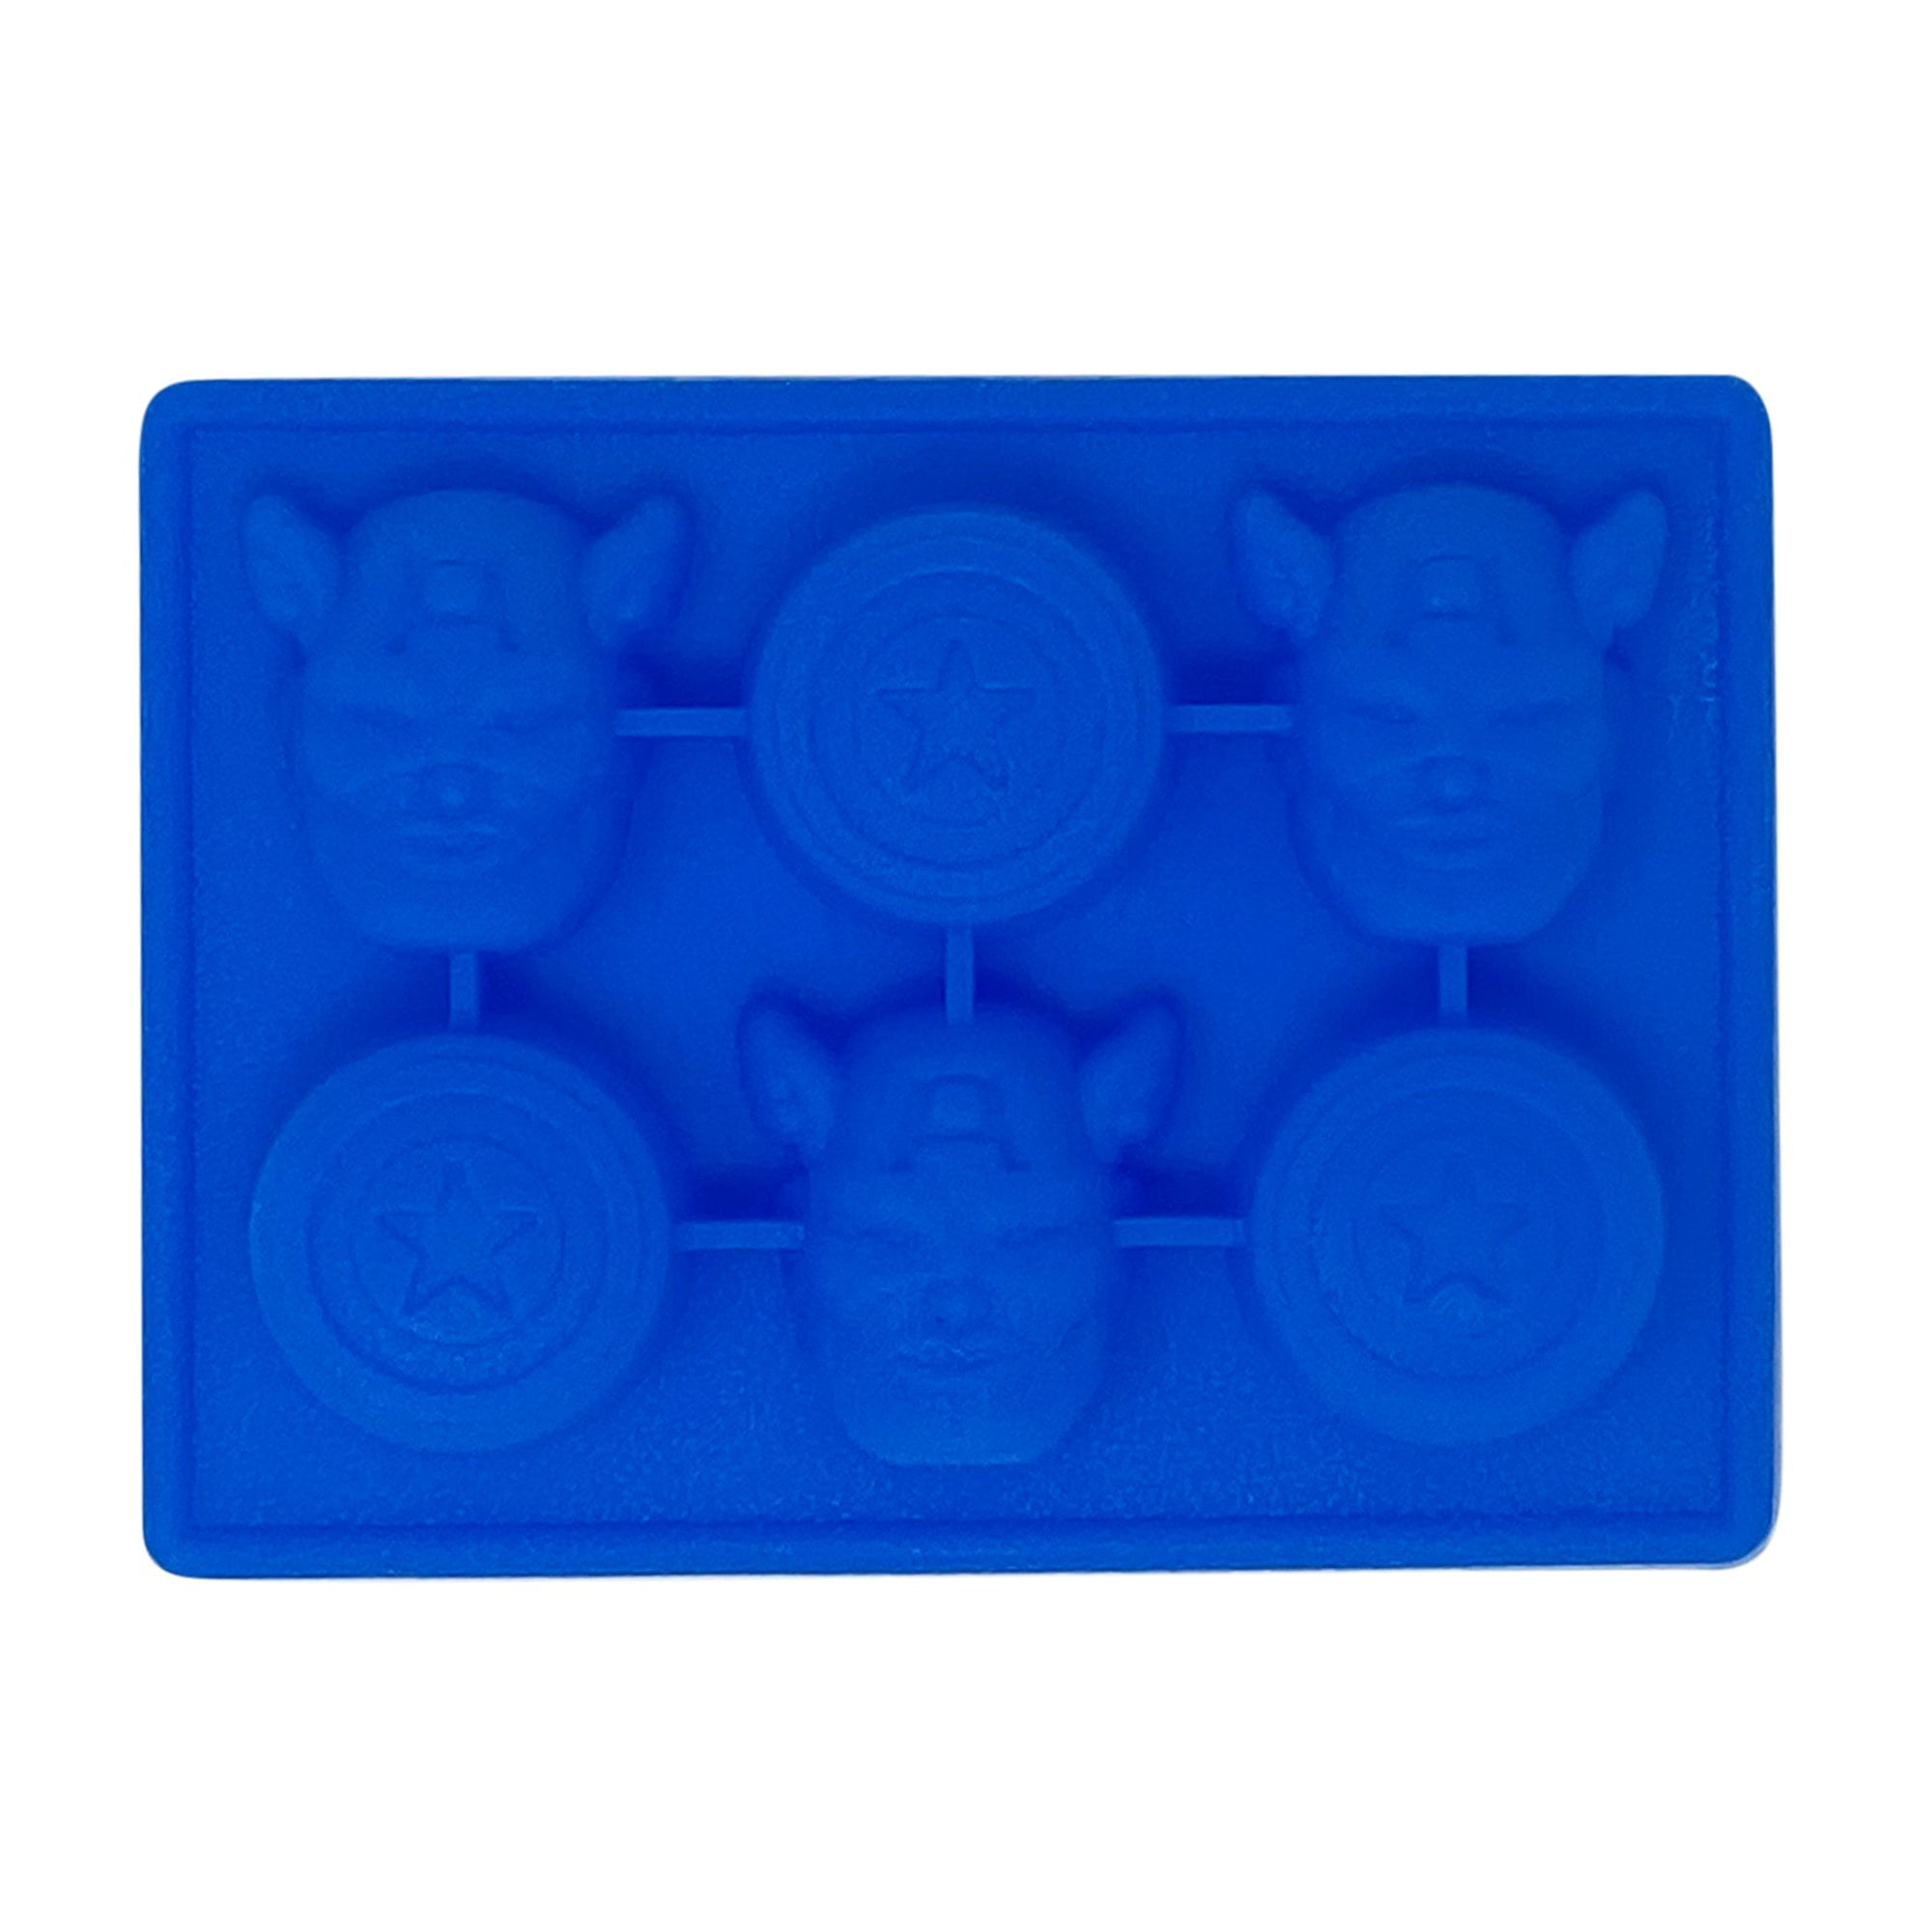 Creative Silicone Blue Wars Death Star Round Ball Ice Cube Kitchen Bar  Accessories Silicone Ice Cube Mold Tray IDY Cocktail Bar - AliExpress